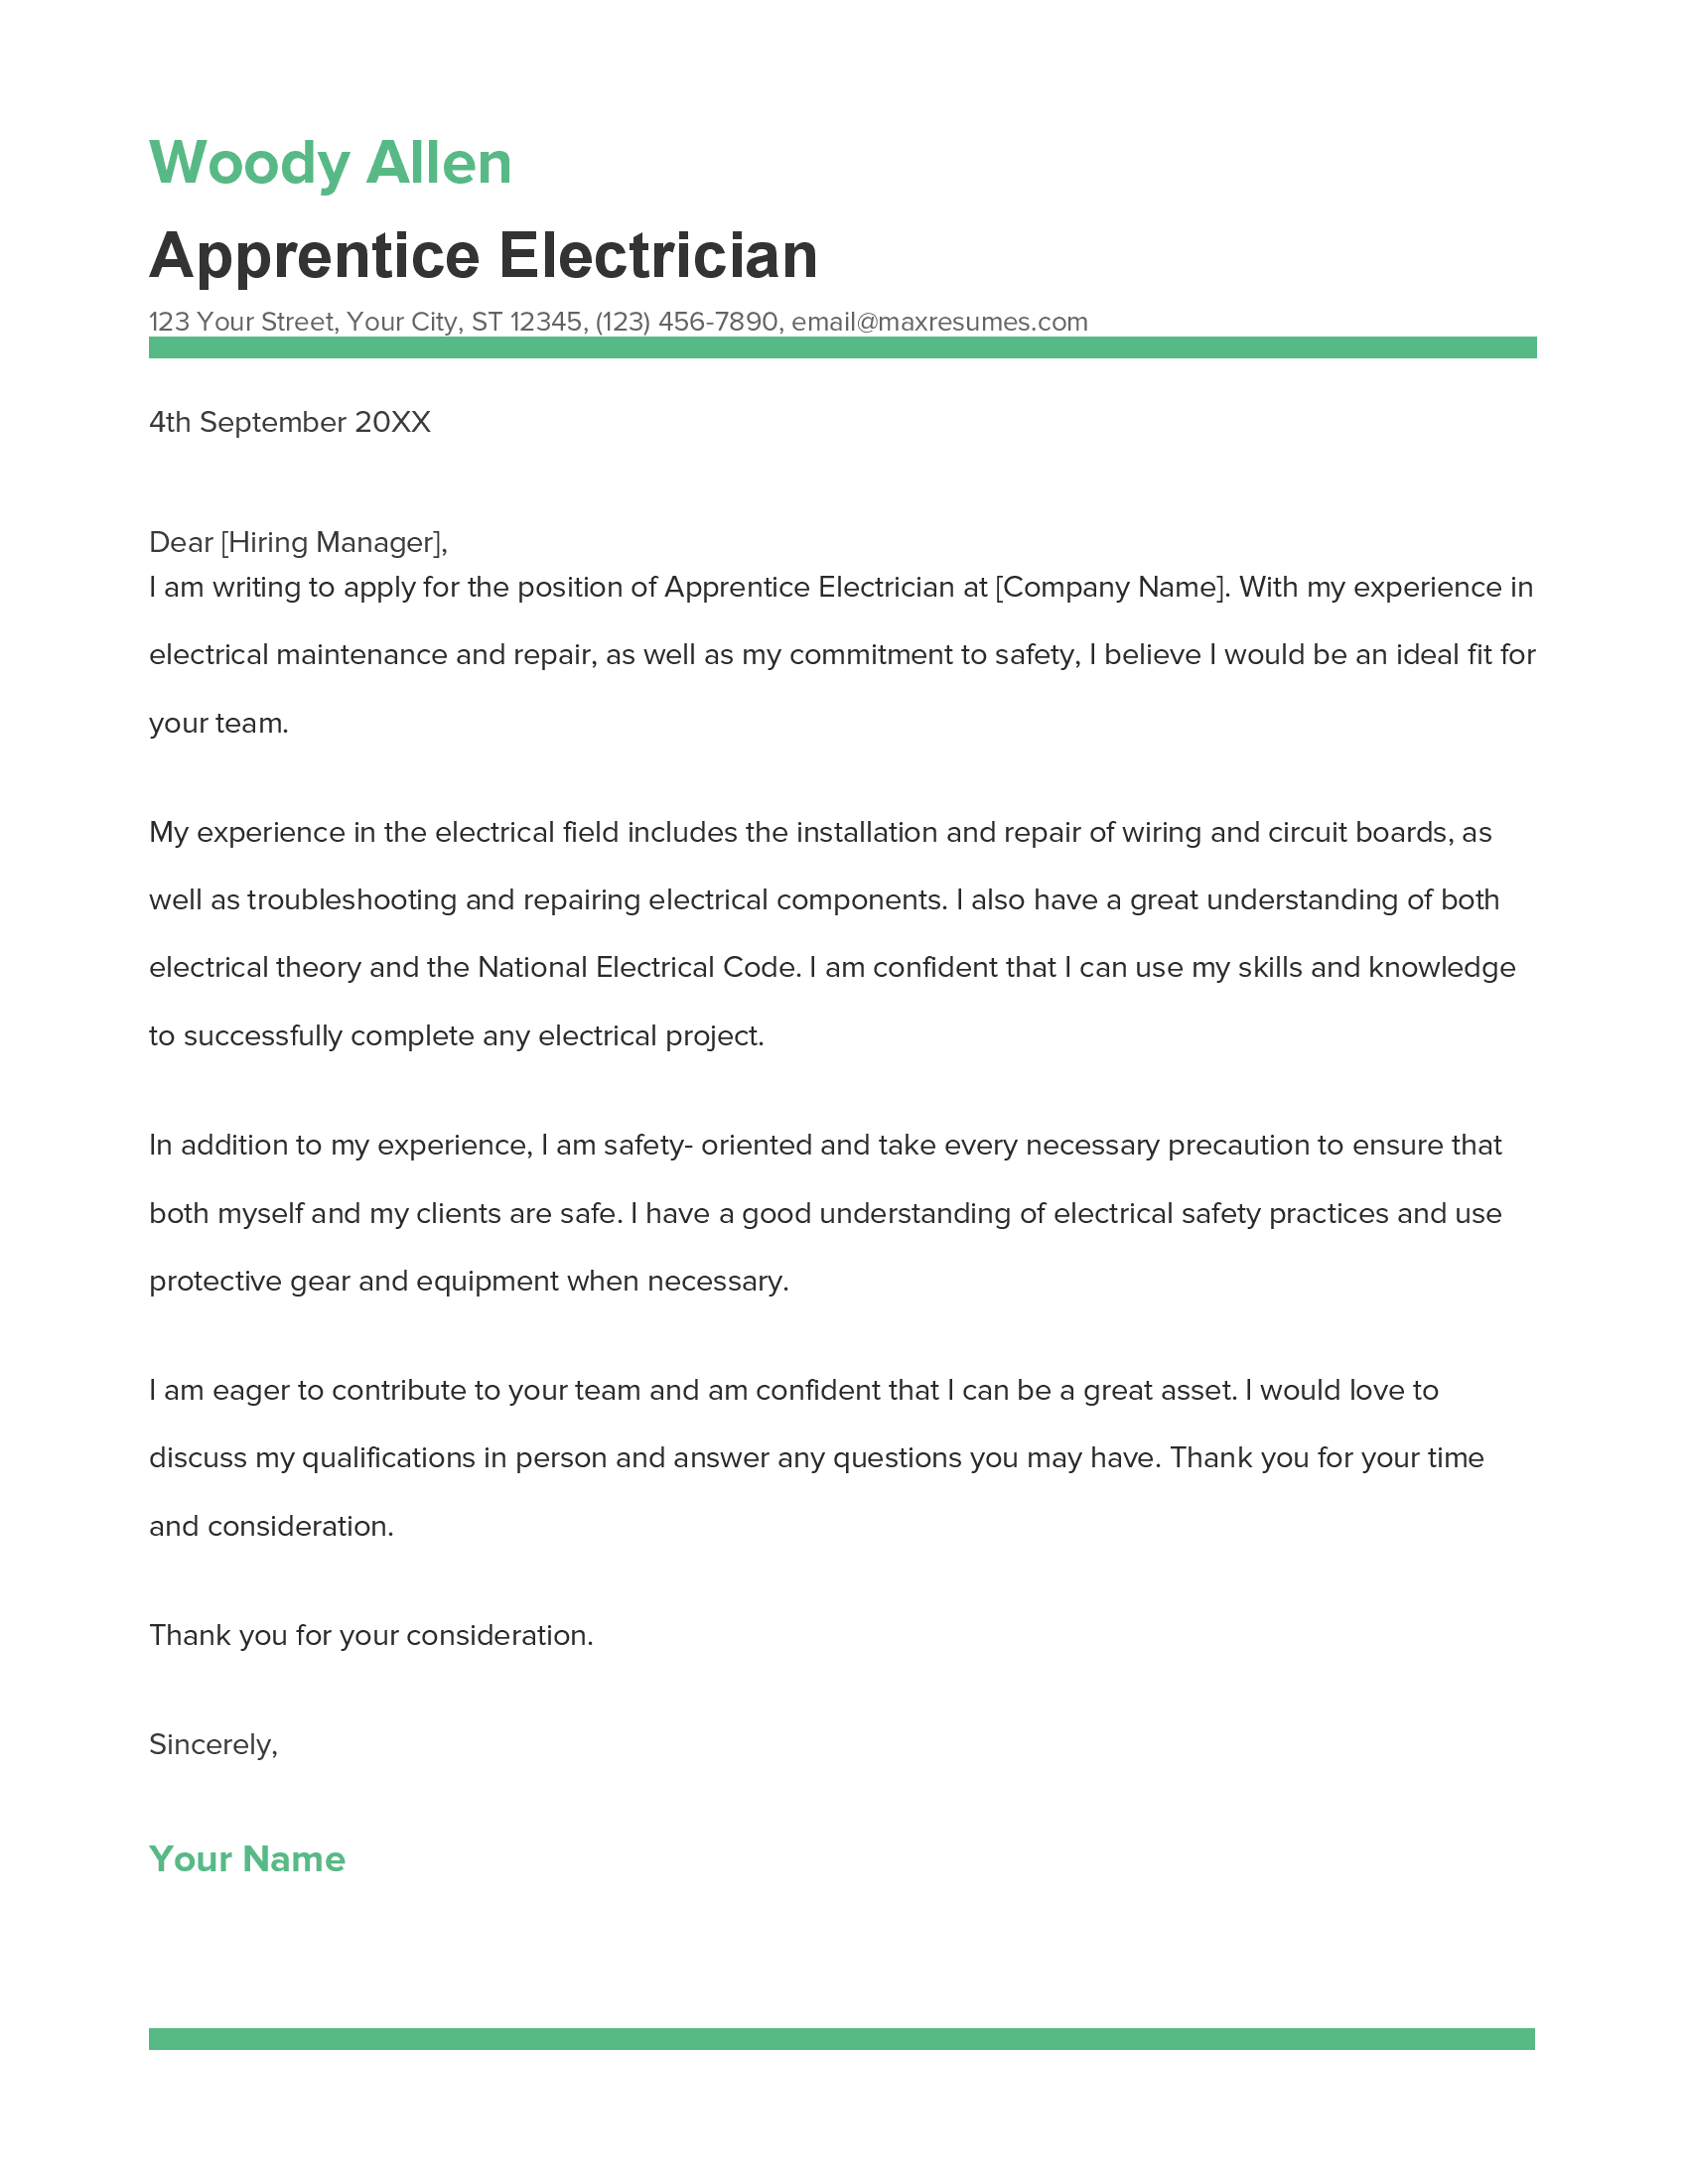 Apprentice Electrician Cover Letter Example